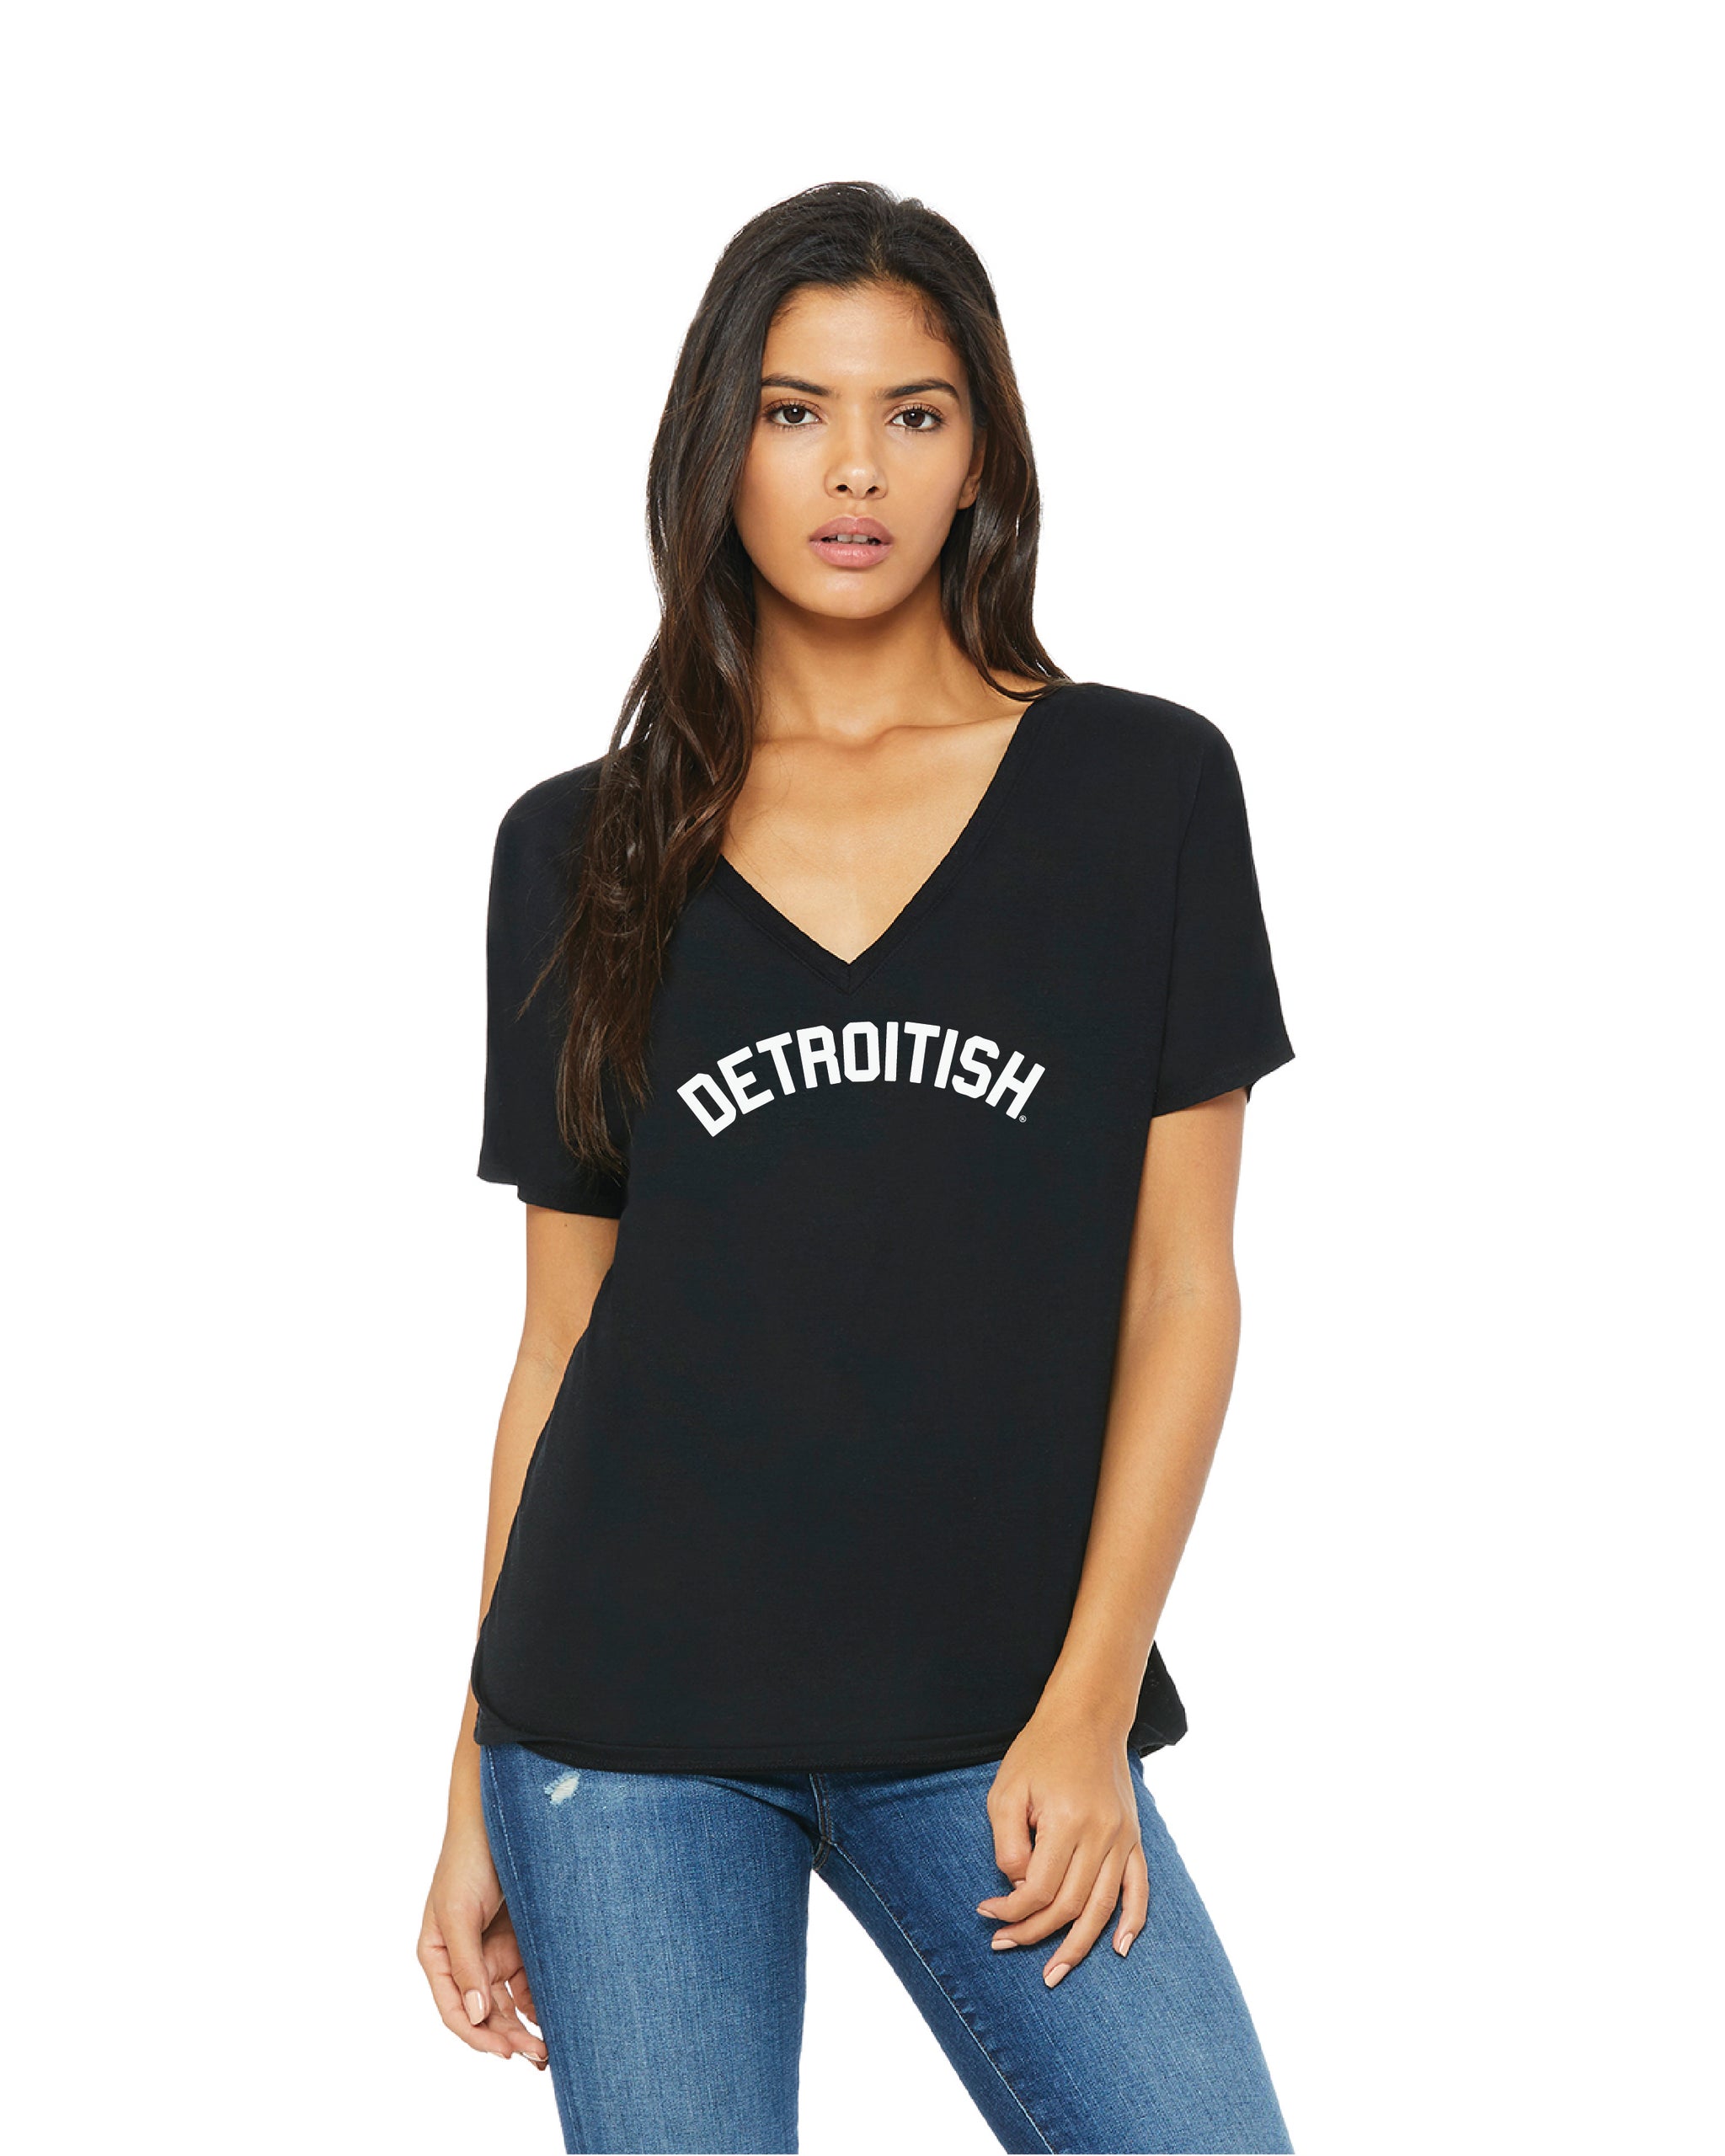 NEW Detroitish Women's slouchy v-neck t-shirt - The Great Lakes State